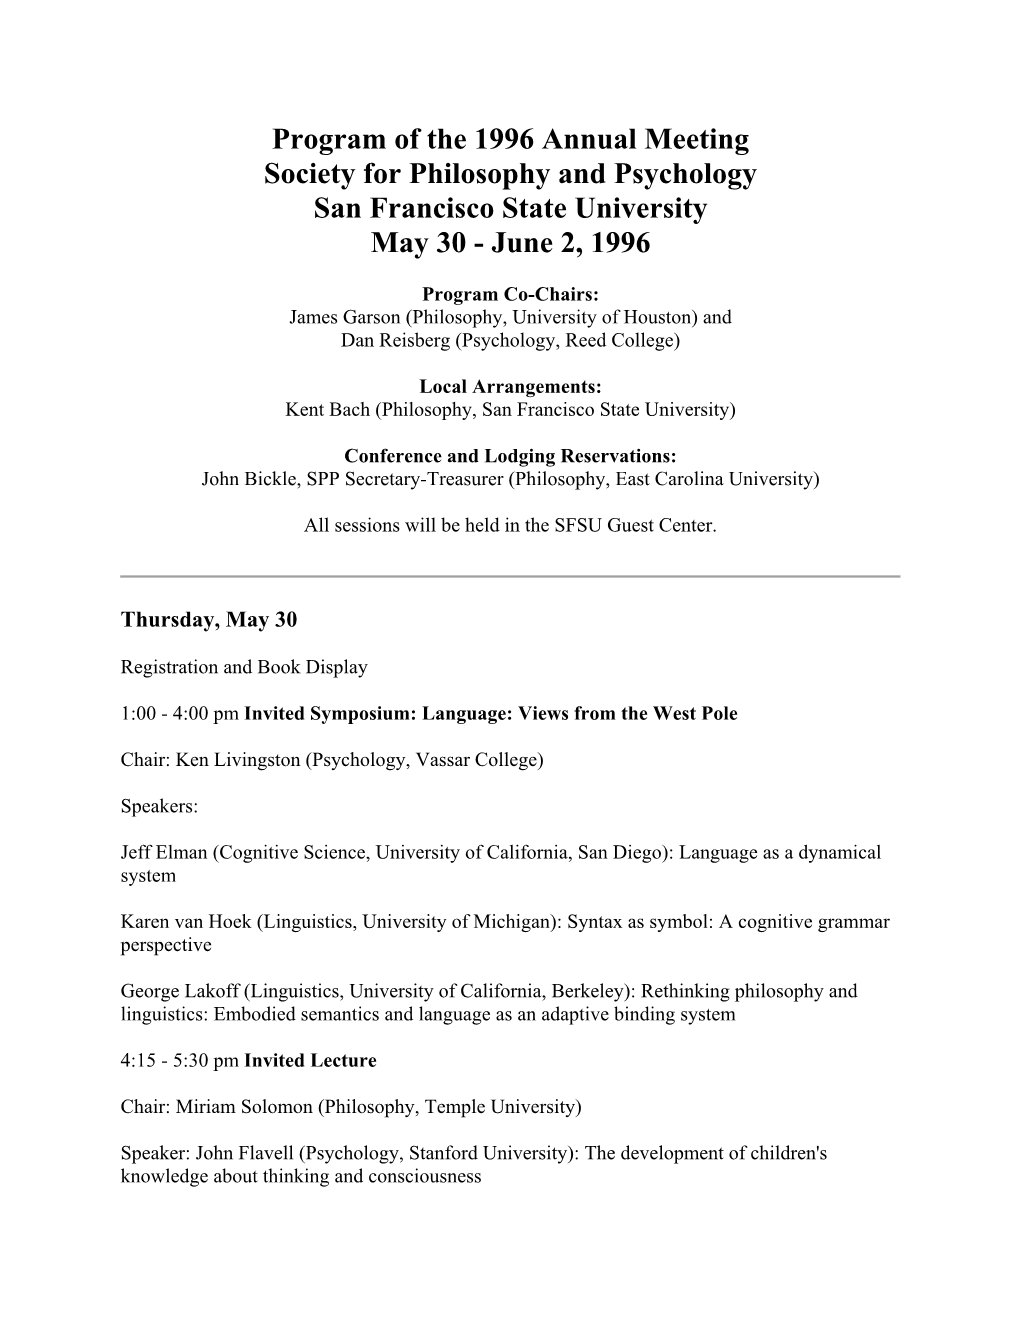 Program of the 1996 Annual Meeting Society for Philosophy and Psychology San Francisco State University May 30 - June 2, 1996